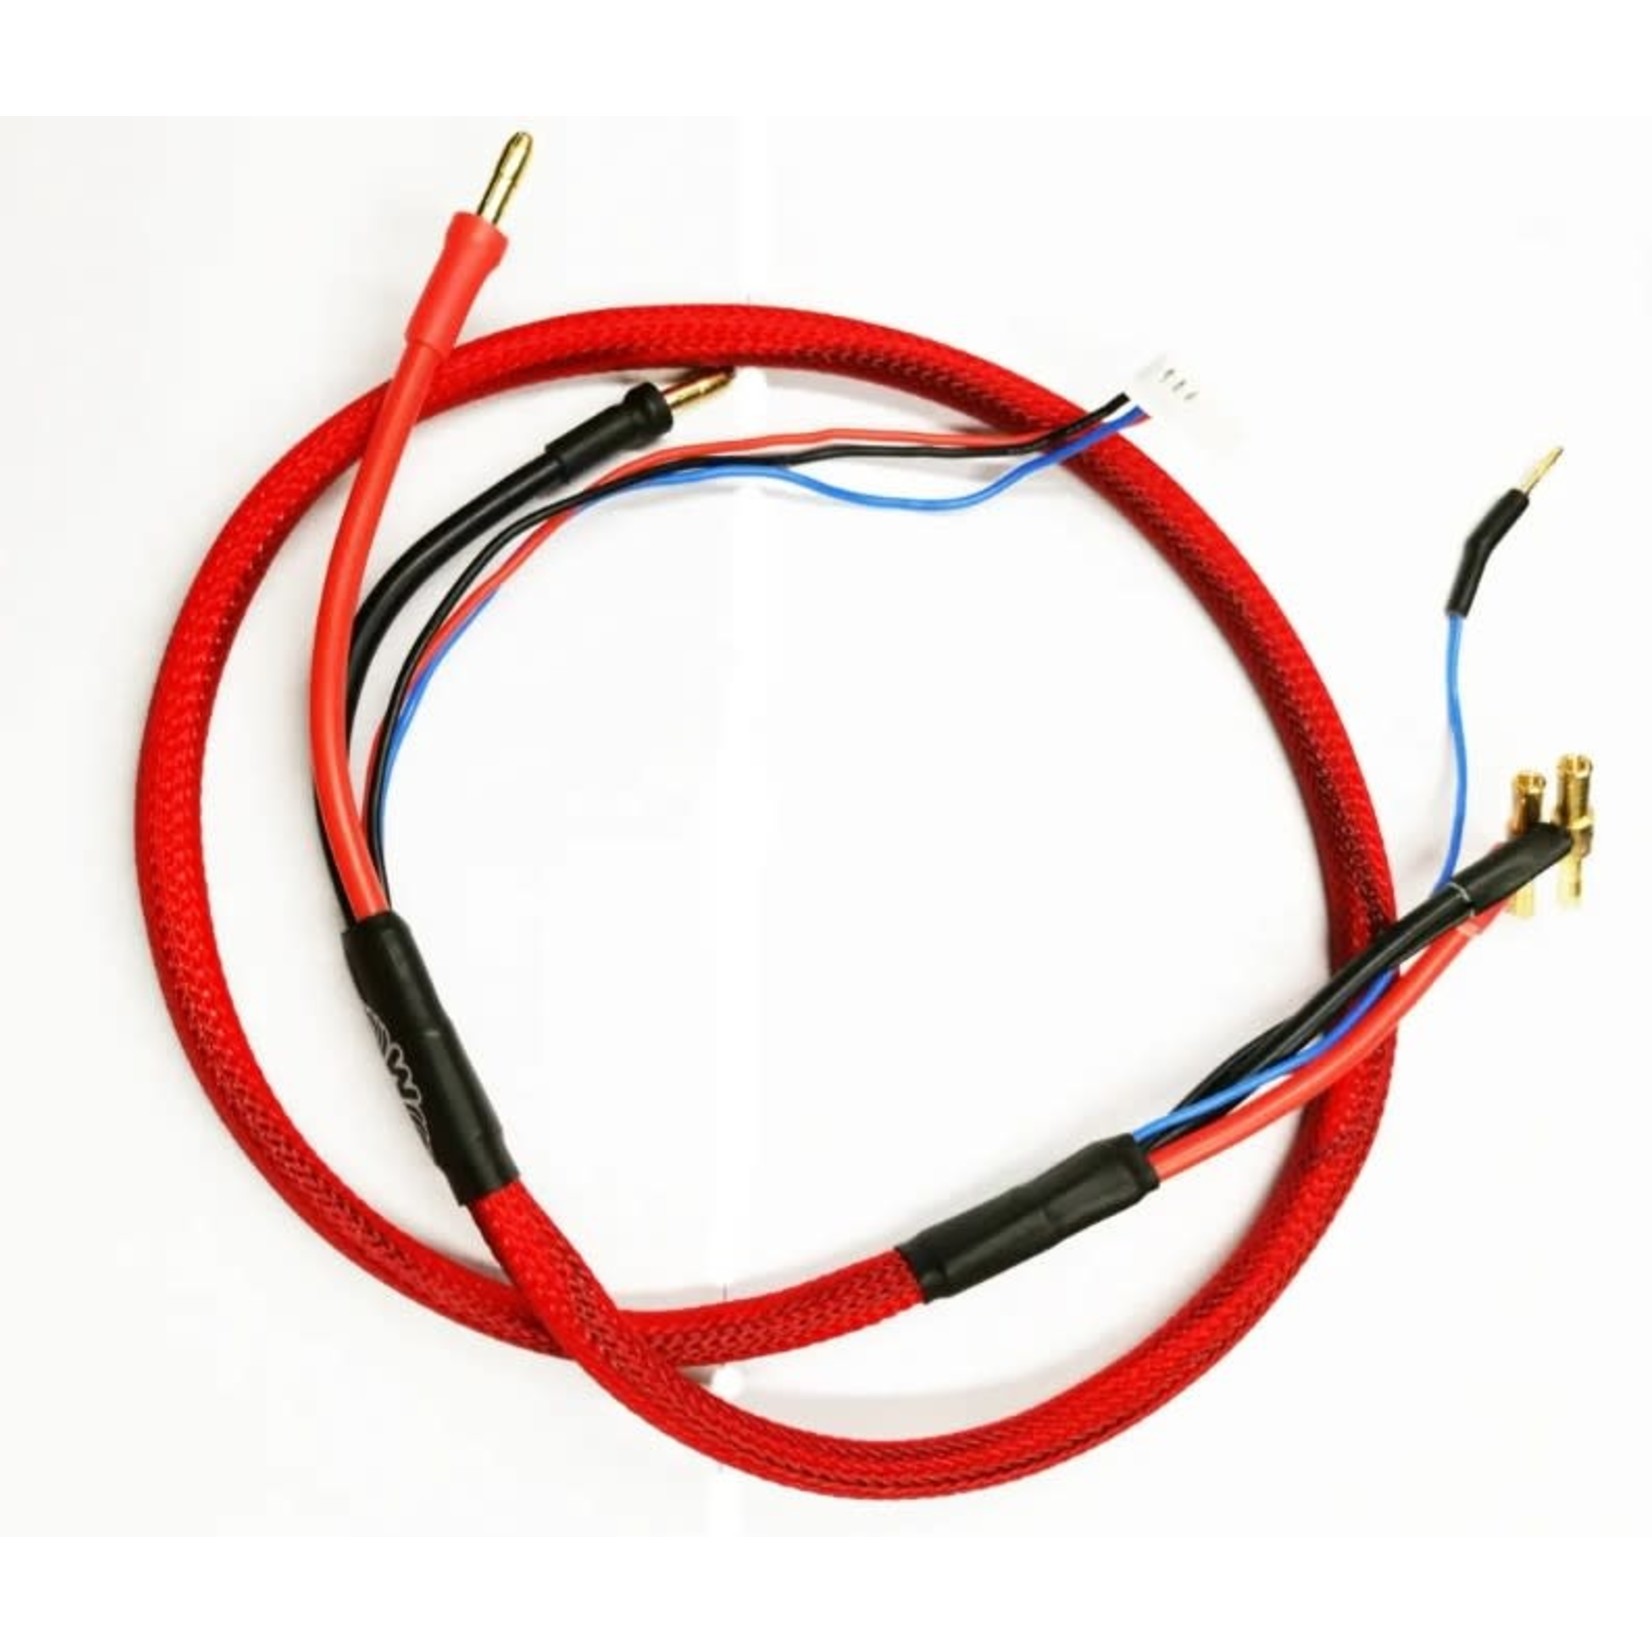 MCALLISTER RACING 36XL Charge Lead 4/5 mm